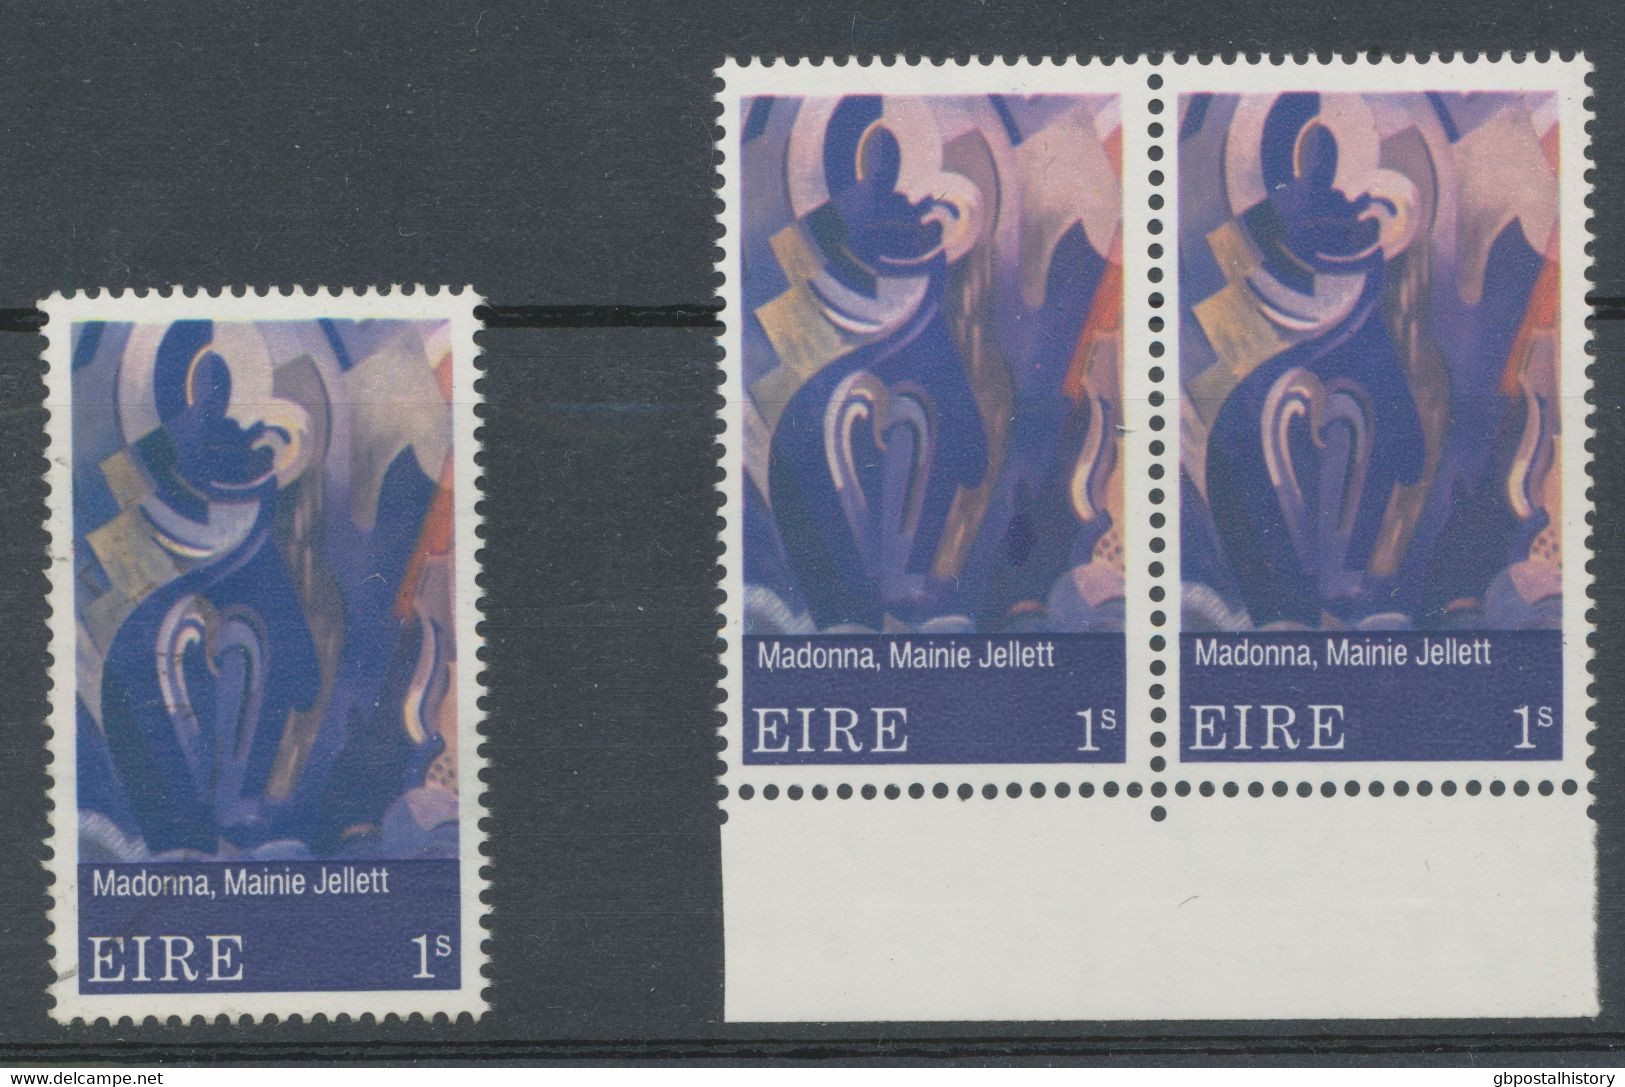 IRELAND 1970 Contemporary Irish Art 1S Superb Used MAJOR VARIETY COLOR PINK On The Left Stamp Is Almost Complete MISSING - Gebruikt